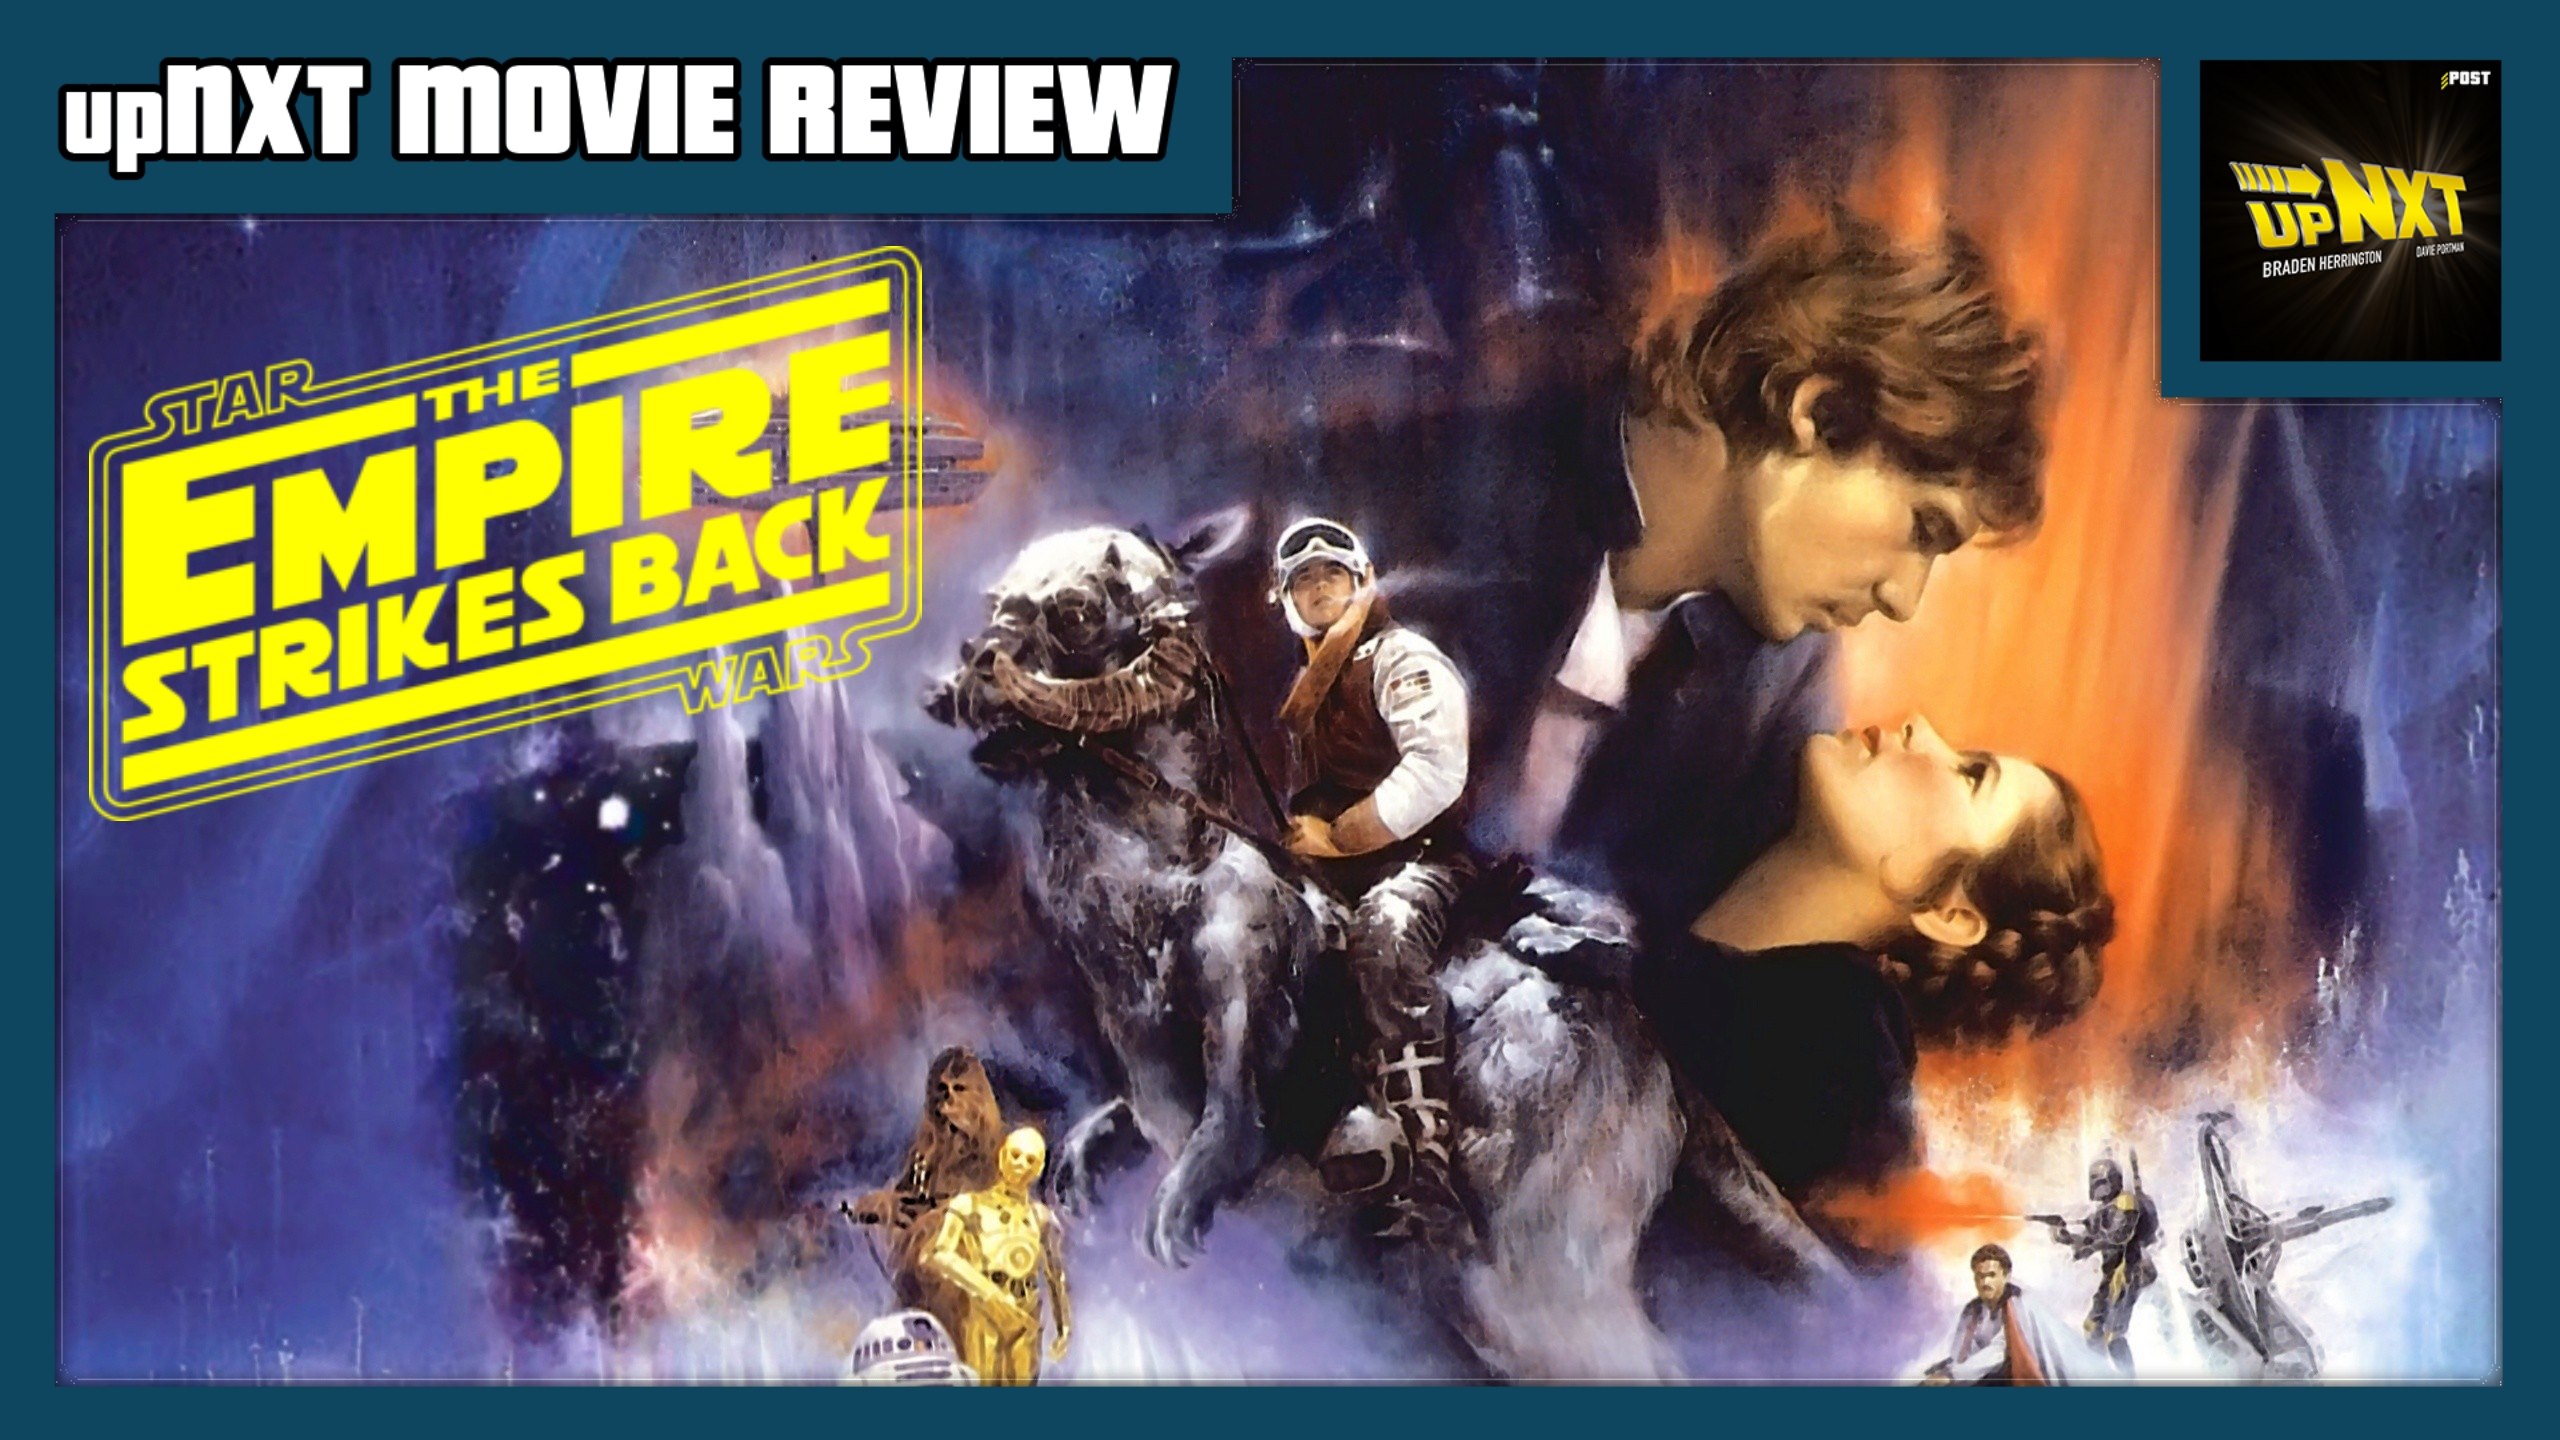 upNXT MOVIE REVIEW: Star Wars: Episode V – The Empire Strikes Back